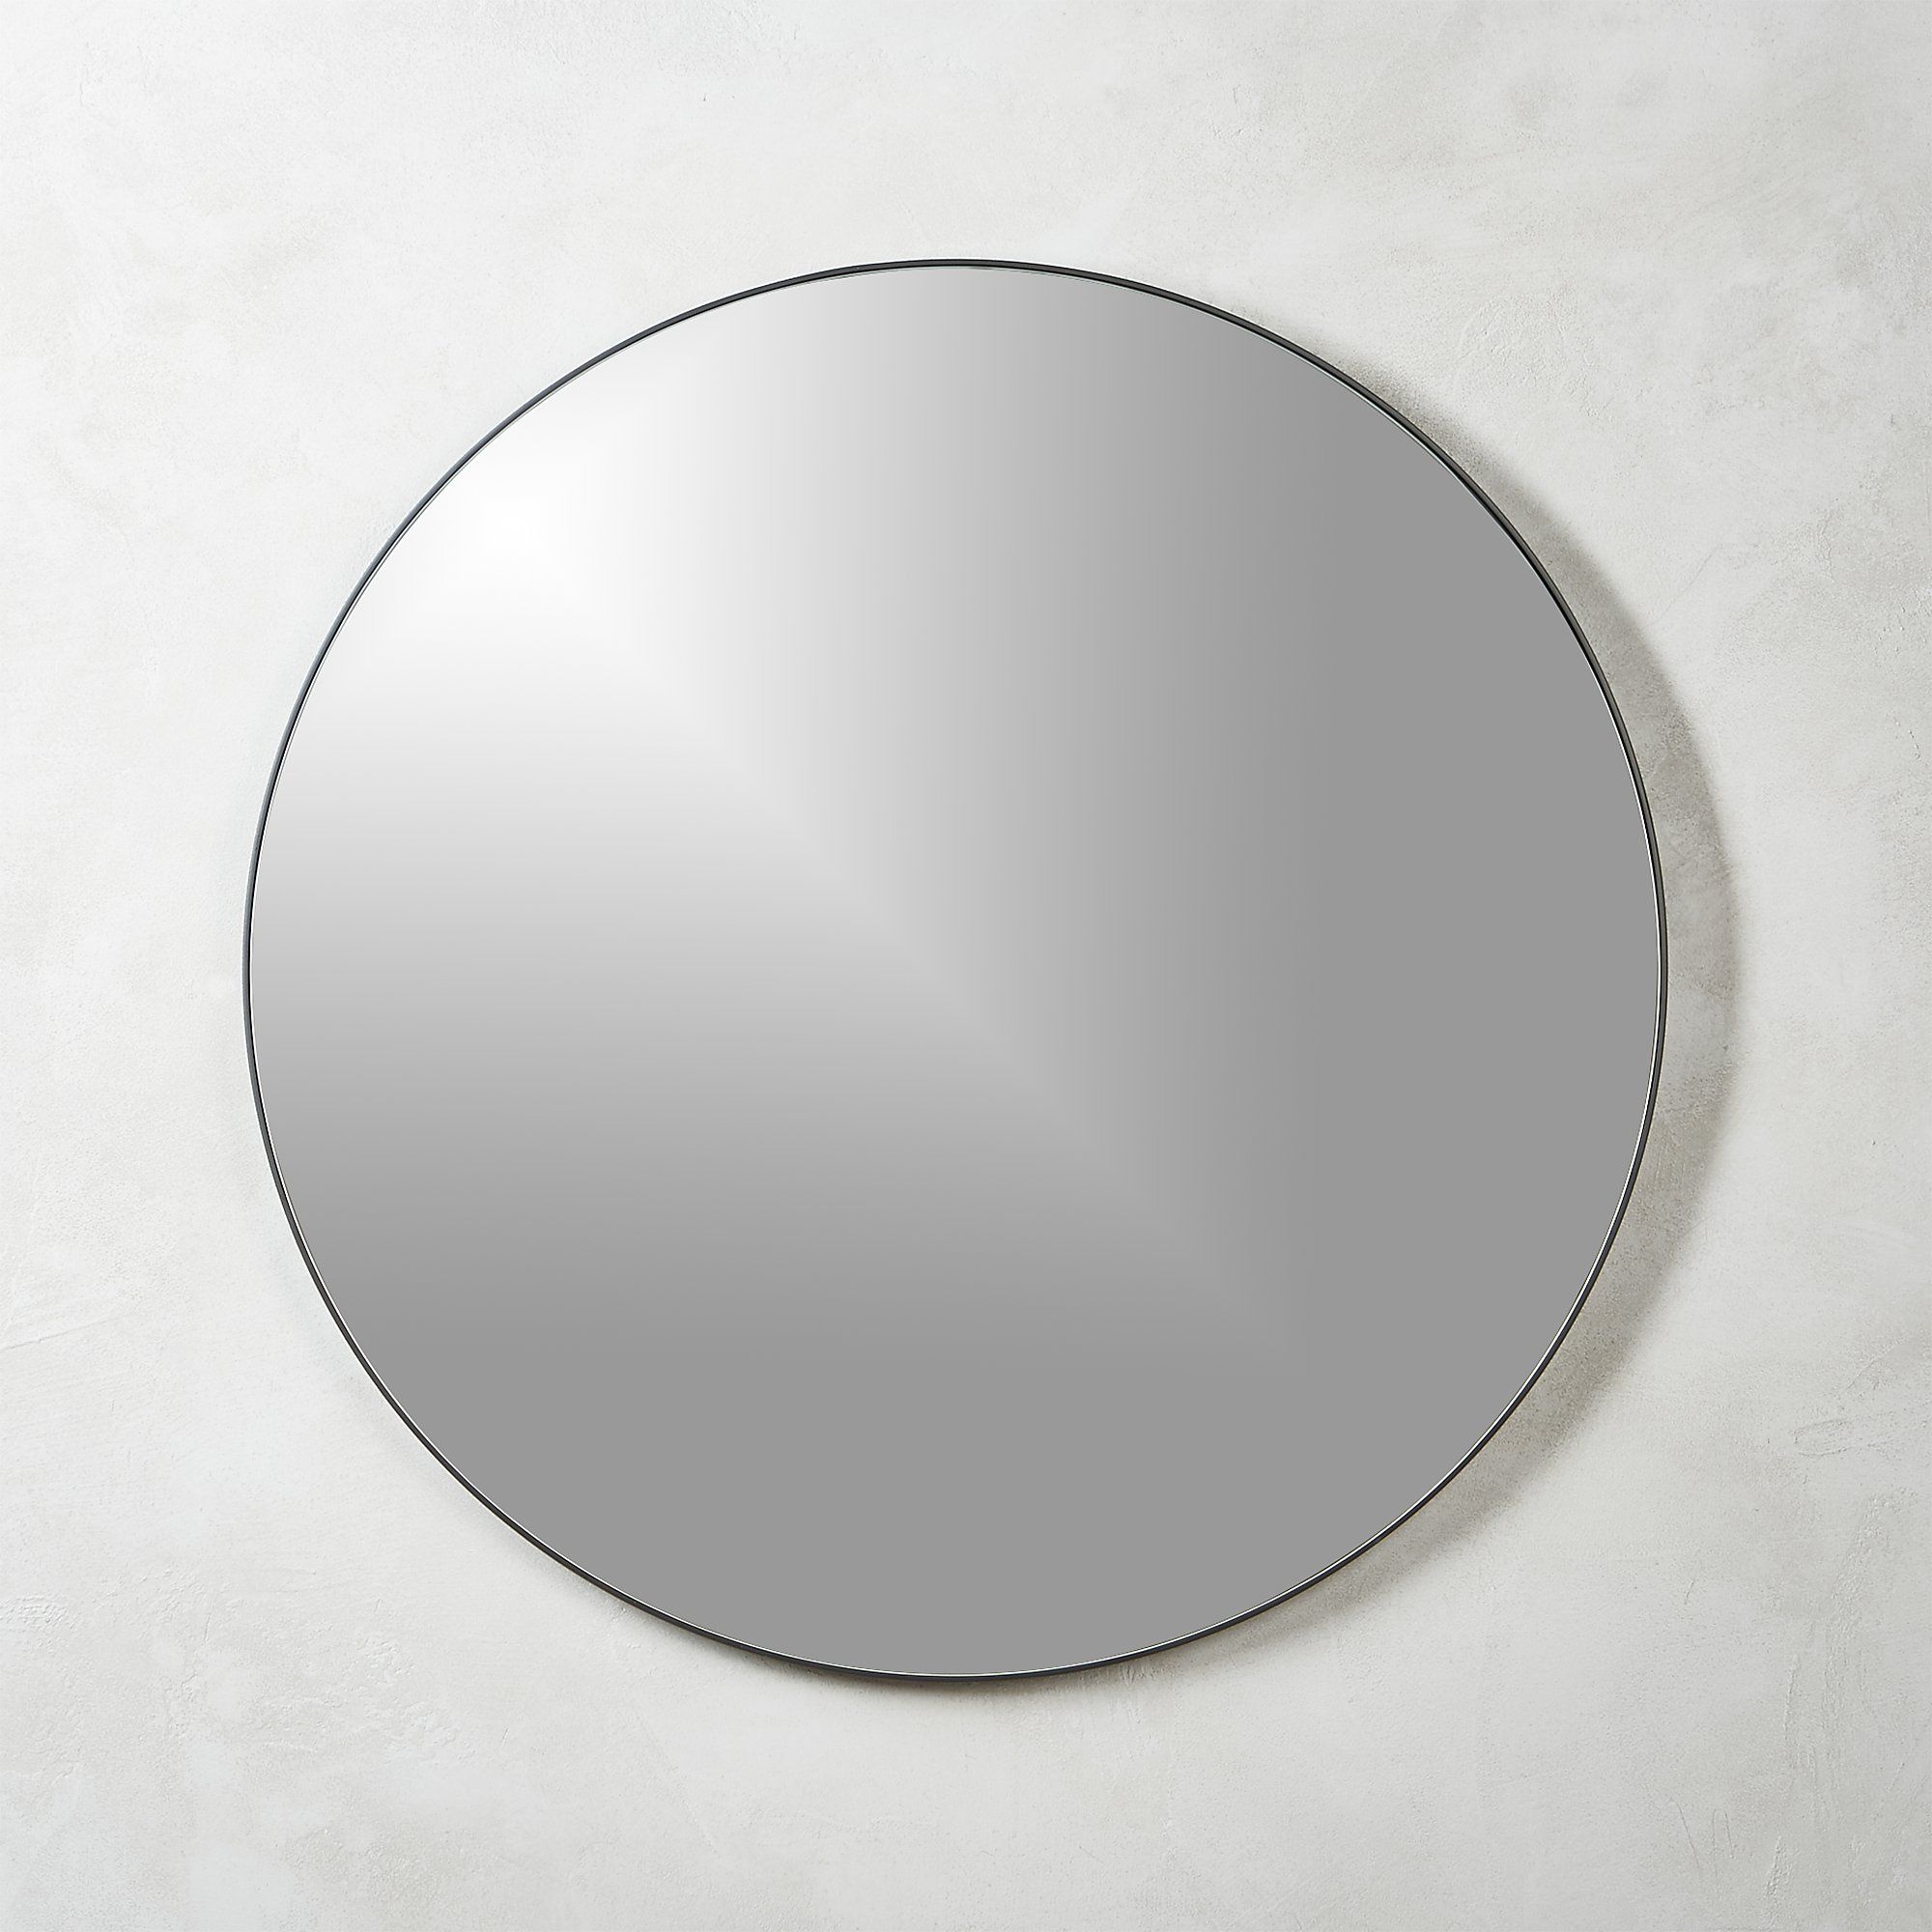 Black Infinity Edge Round Mirror | Free Shipping | Luxe Mirrors For Round Edge Wall Mirrors (View 12 of 15)